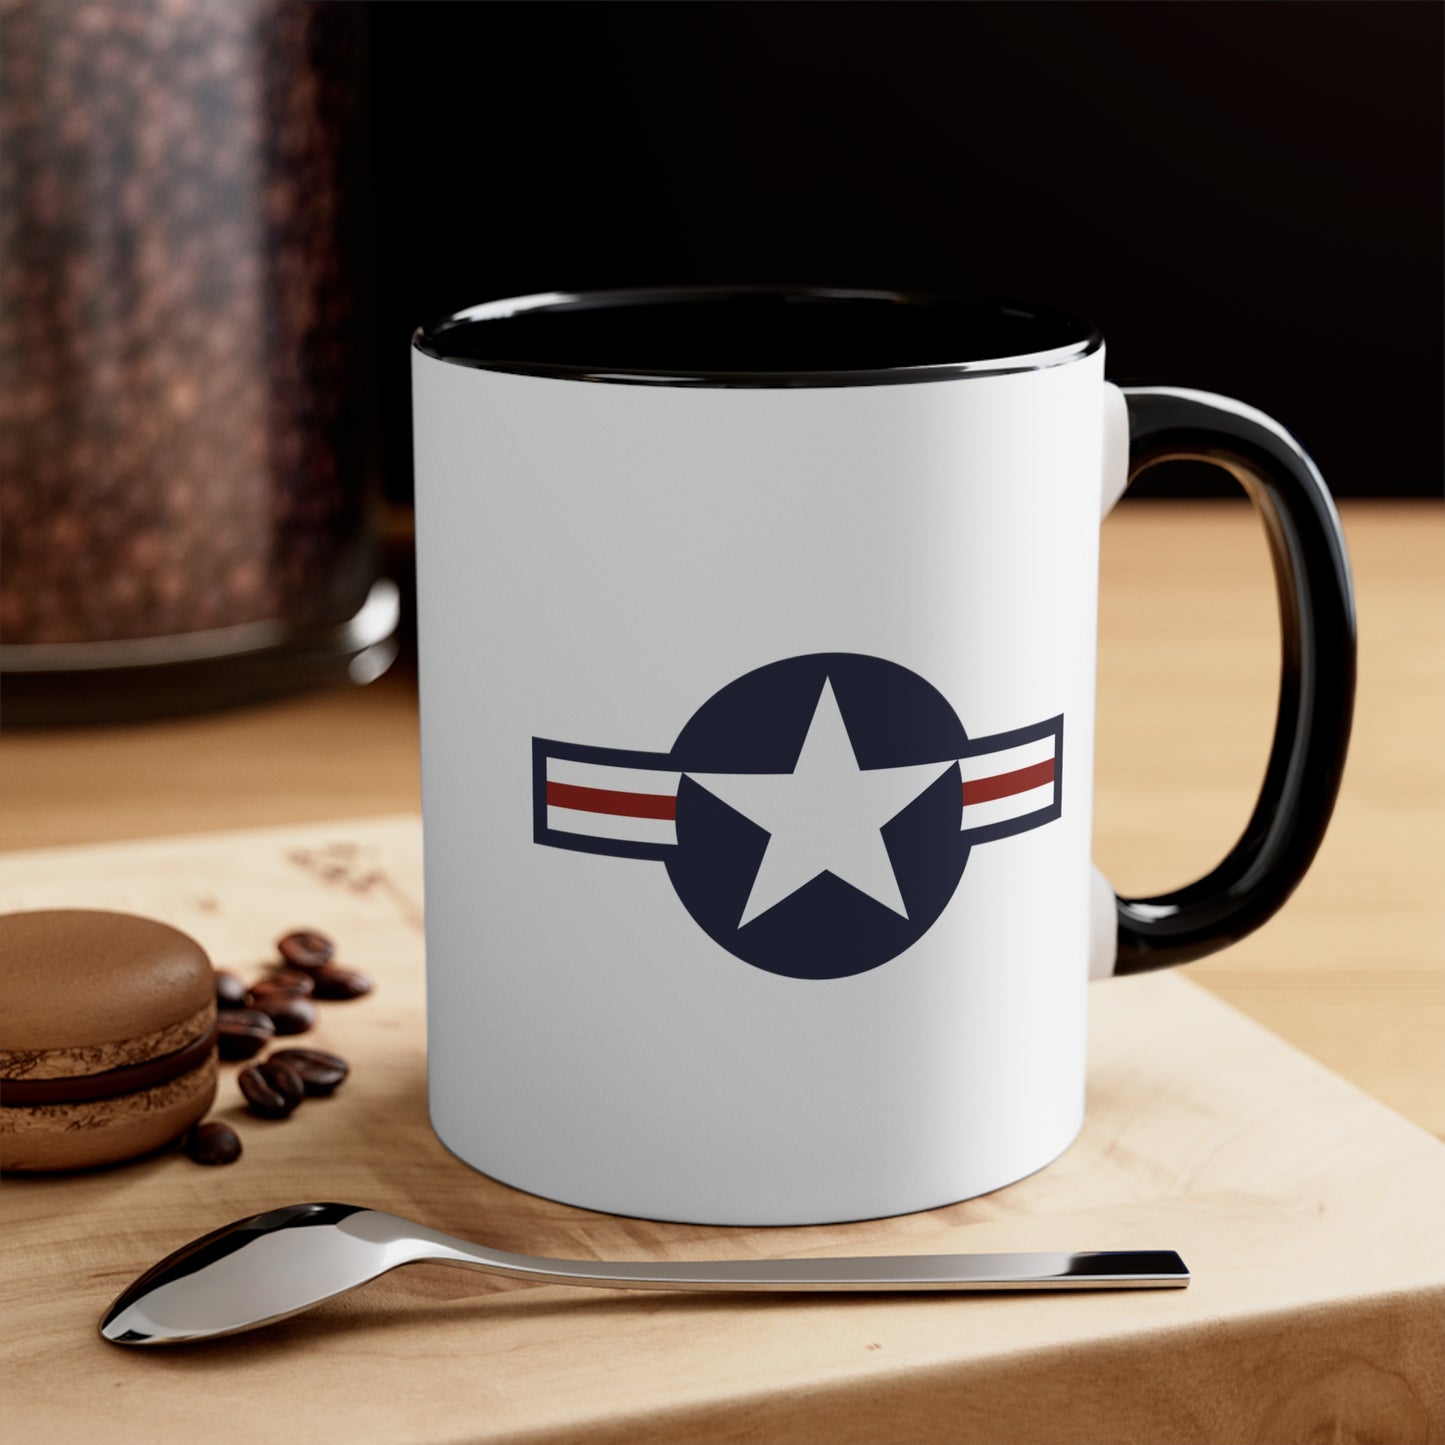 US Air Force Roundel Coffee Mug - Double Sided Black Accent Ceramic 11oz - by TheGlassyLass.com